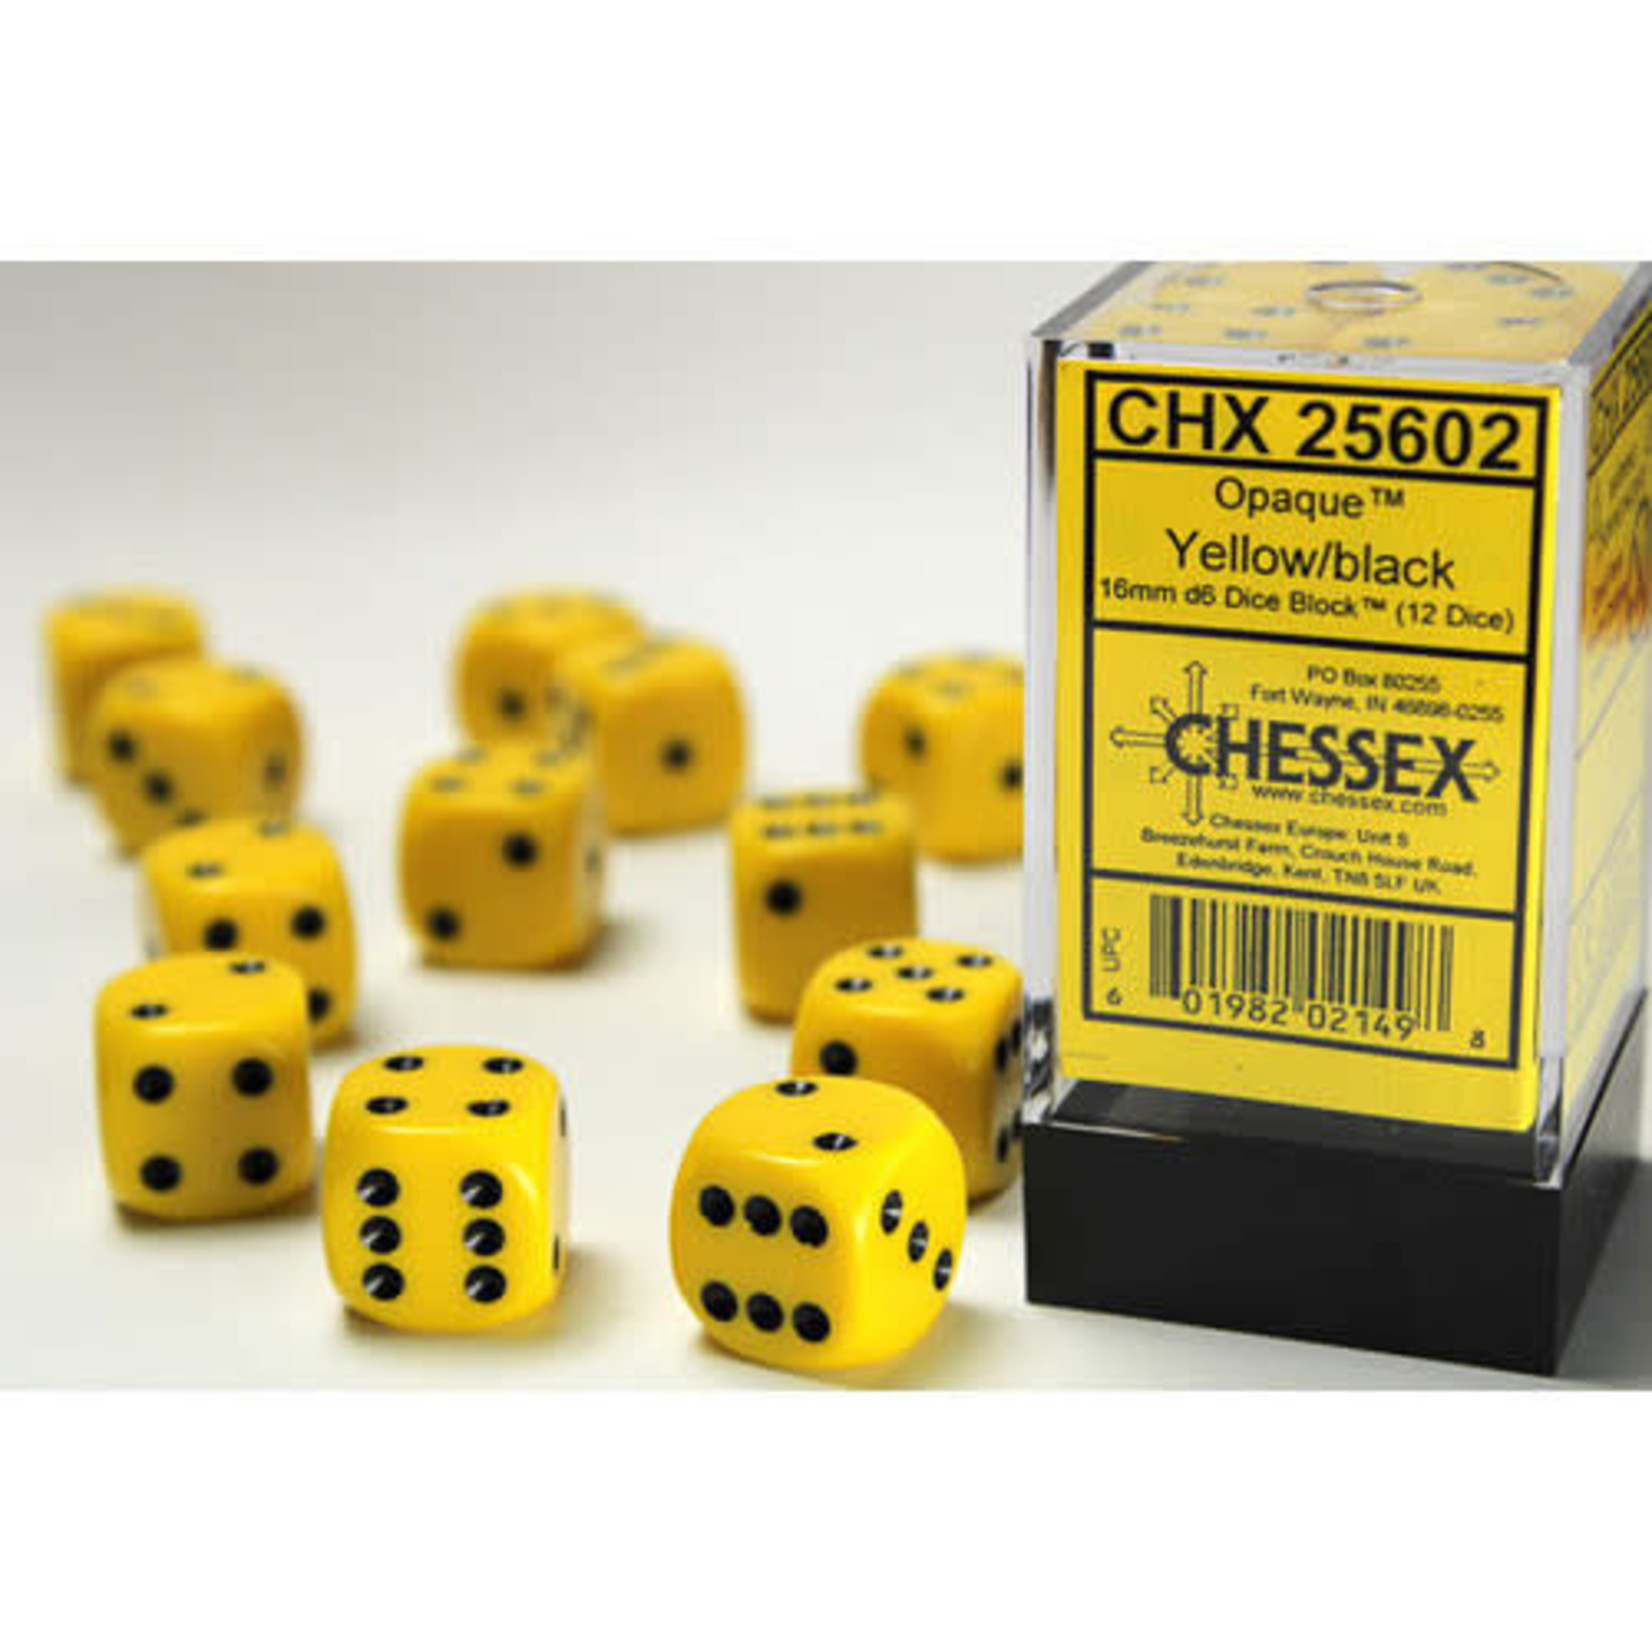 Chessex Chessex Opaque Yellow with Black 16 mm d6 12 die set